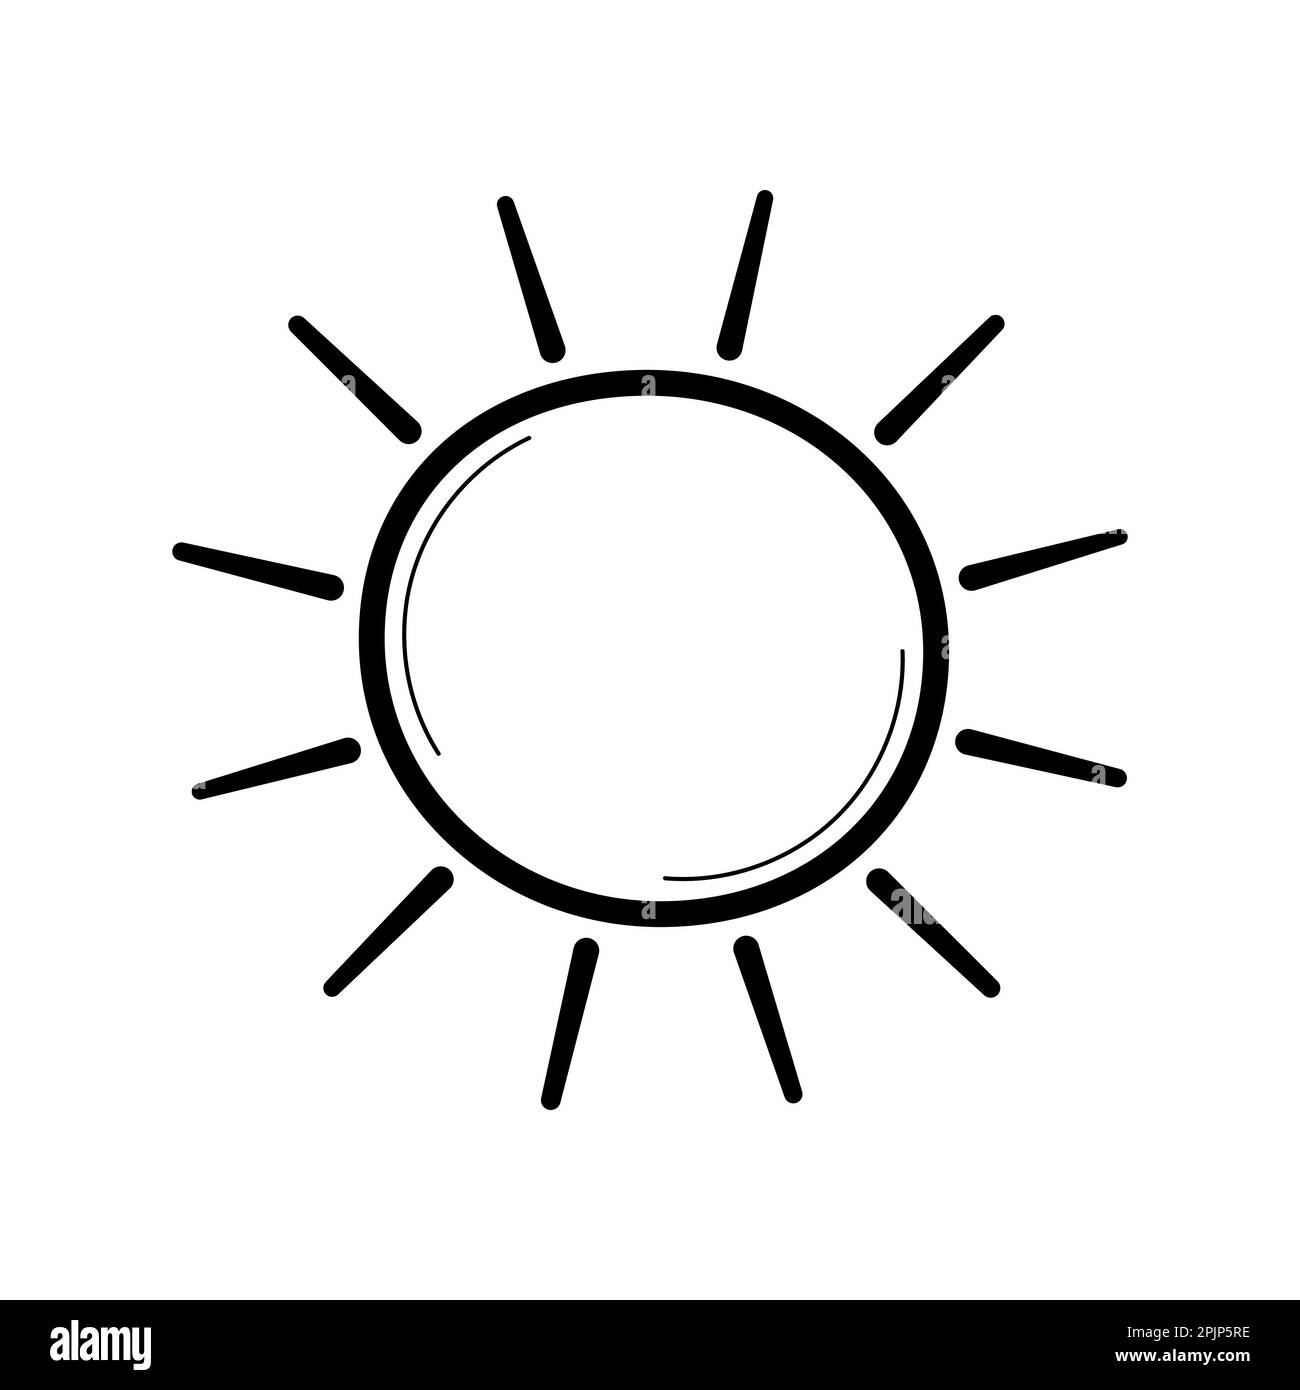 Sun. Hand drawn sketch icon. Symbol of the sunny weather. Isolated vector illustration in doodle line style. Stock Vector